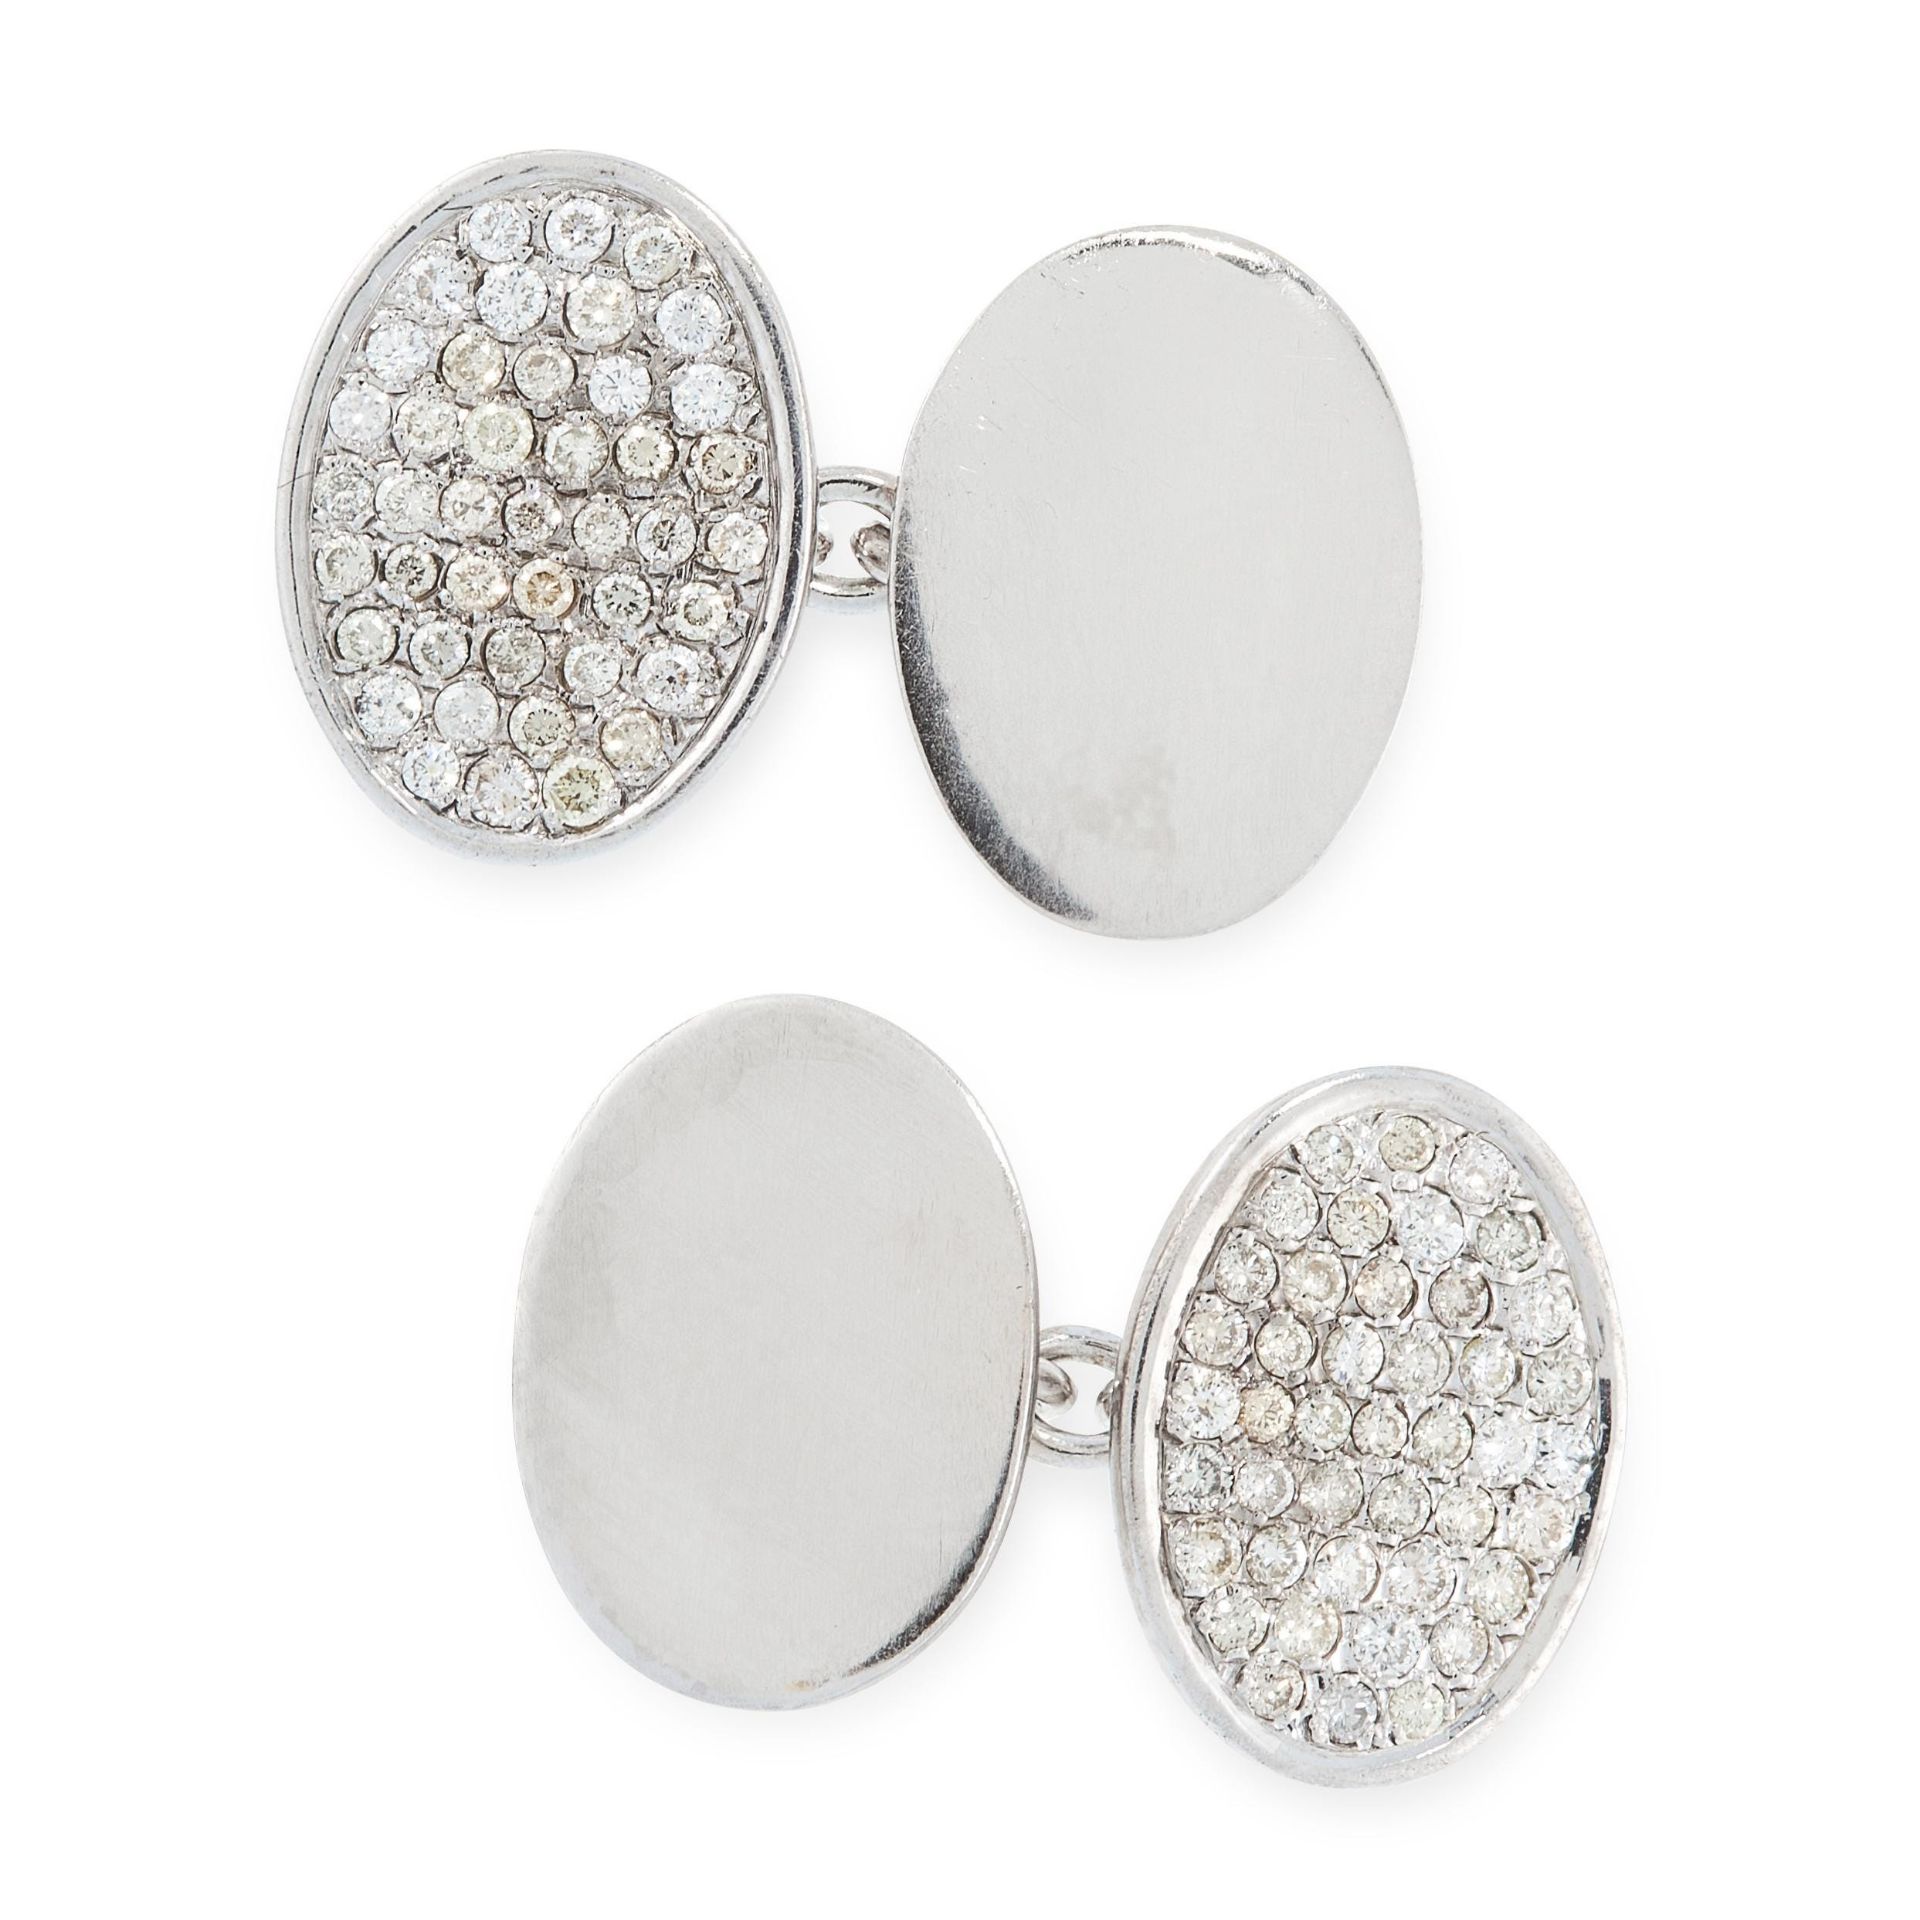 A PAIR OF DIAMOND CUFFLINKS in 18ct white gold, each comprising two oval faces, one face on each